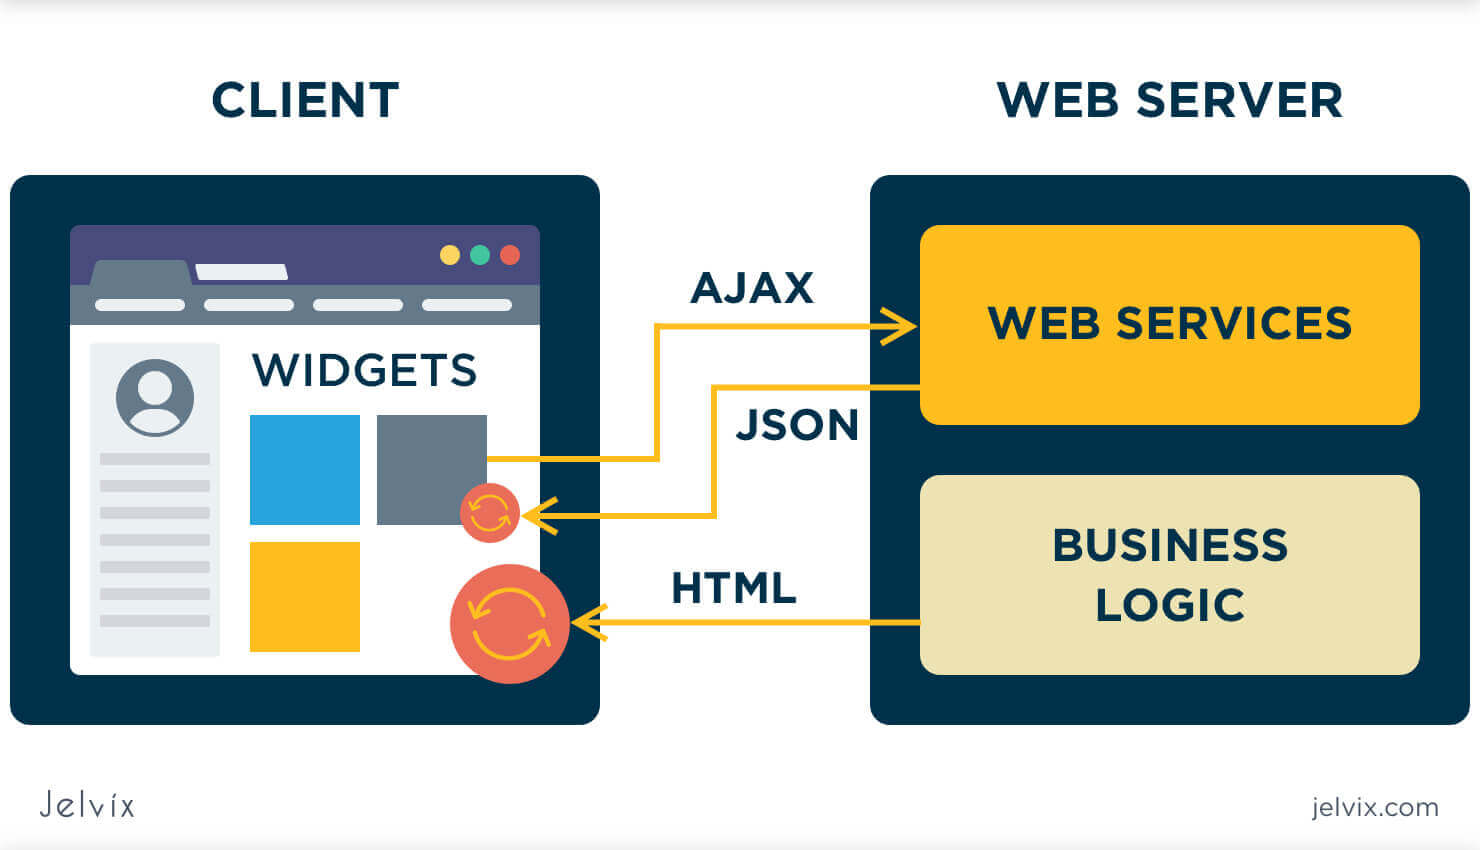 Web Application Architecture: A Guide Through the Intricate Process of  Building an App